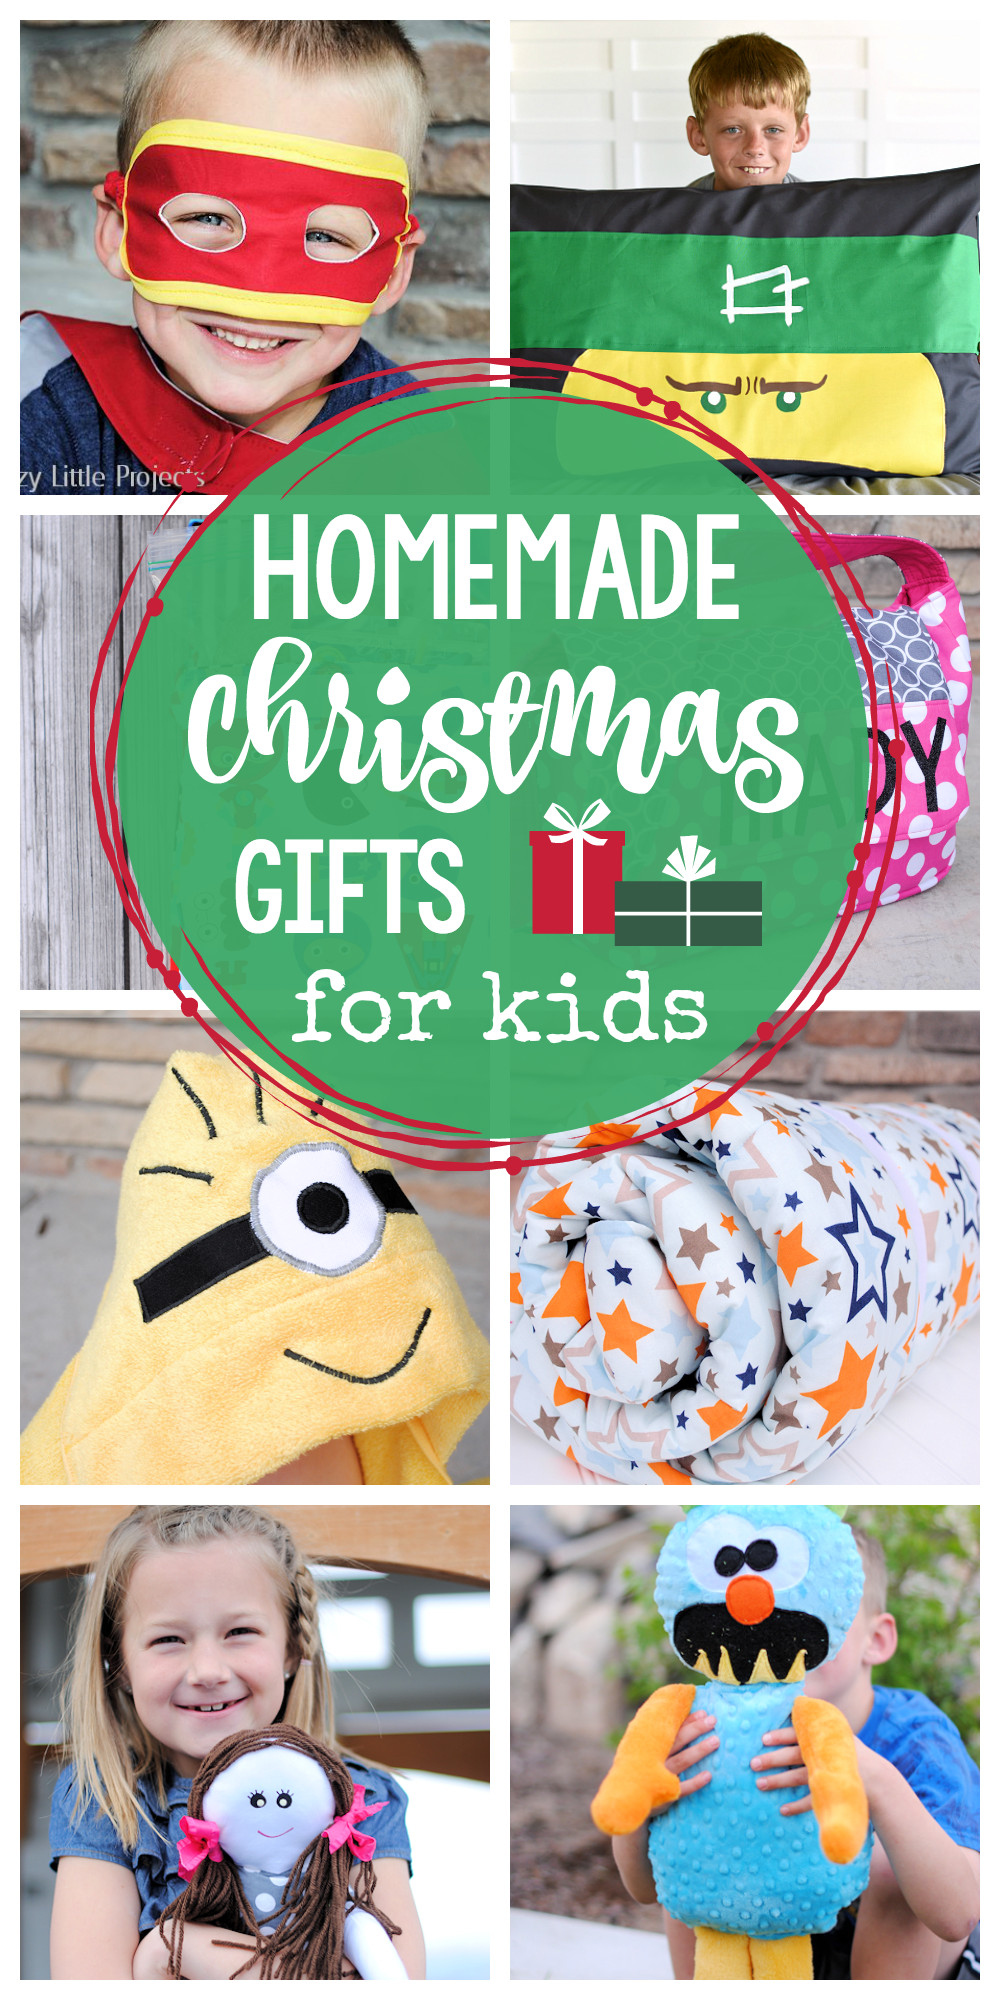 Christmas Gift Idea Kids
 25 Homemade Christmas Gifts for Kids Crazy Little Projects